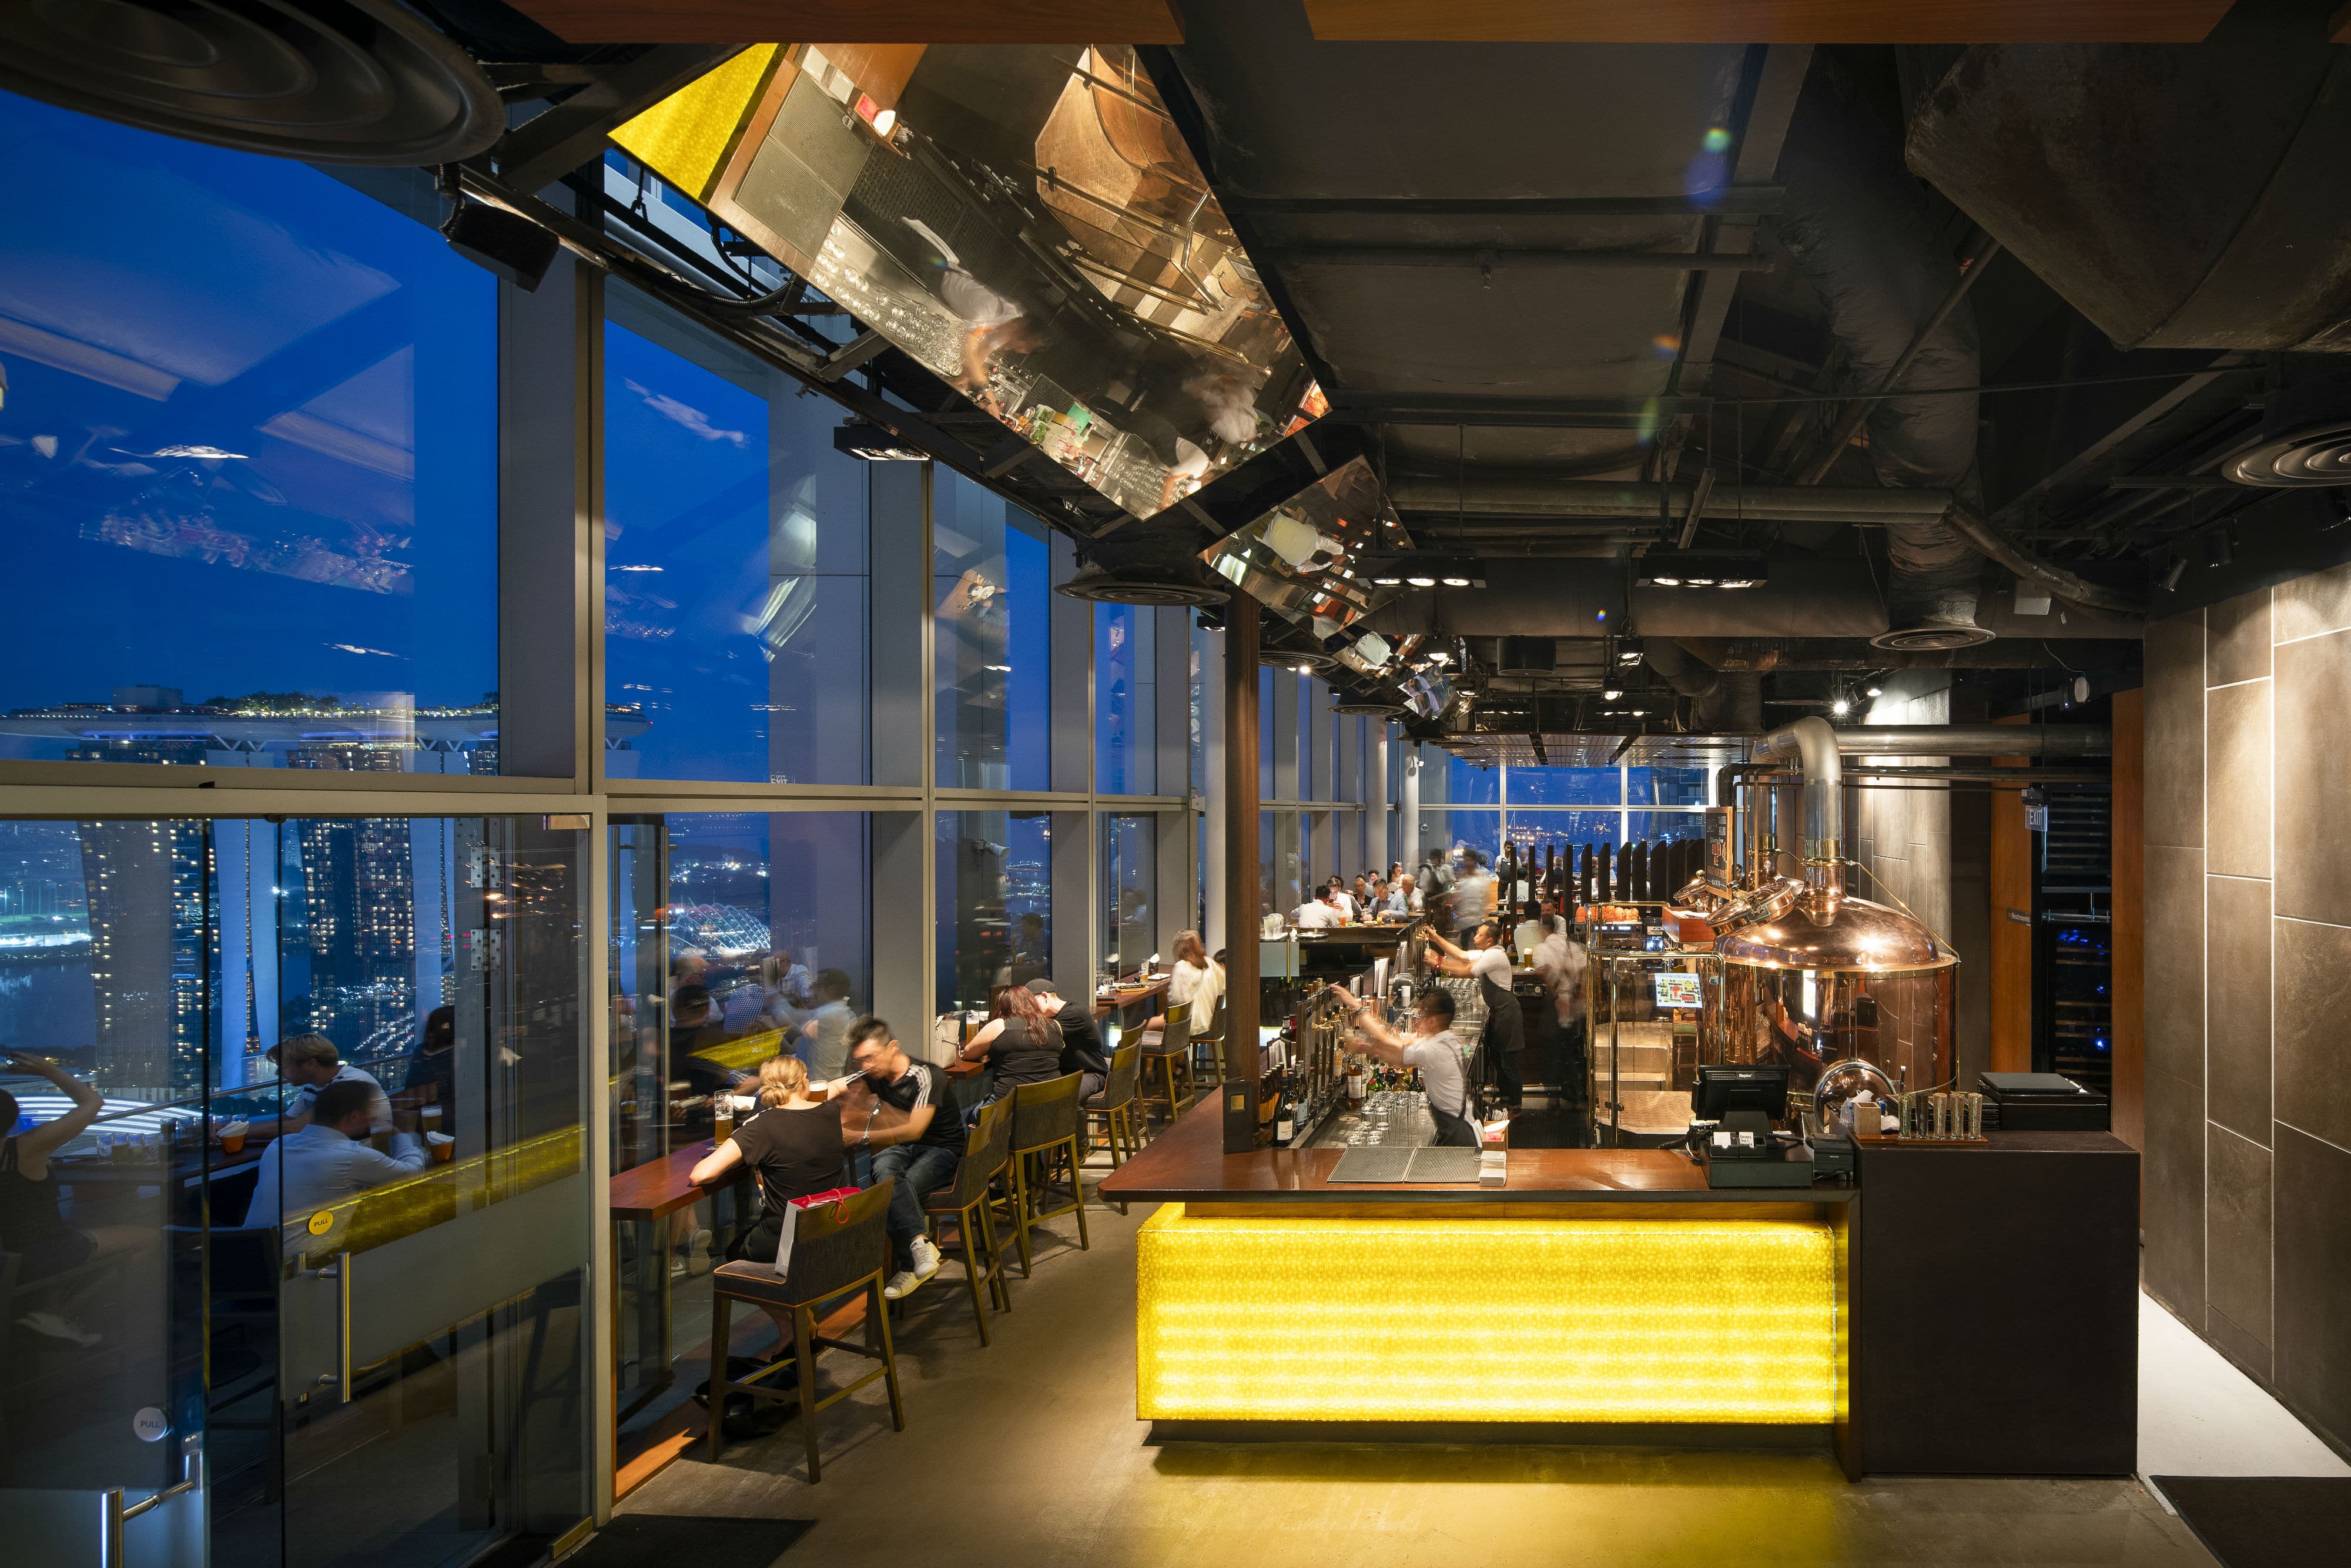 Level 33’s new menu offers a fresh perspective on beer’s culinary use